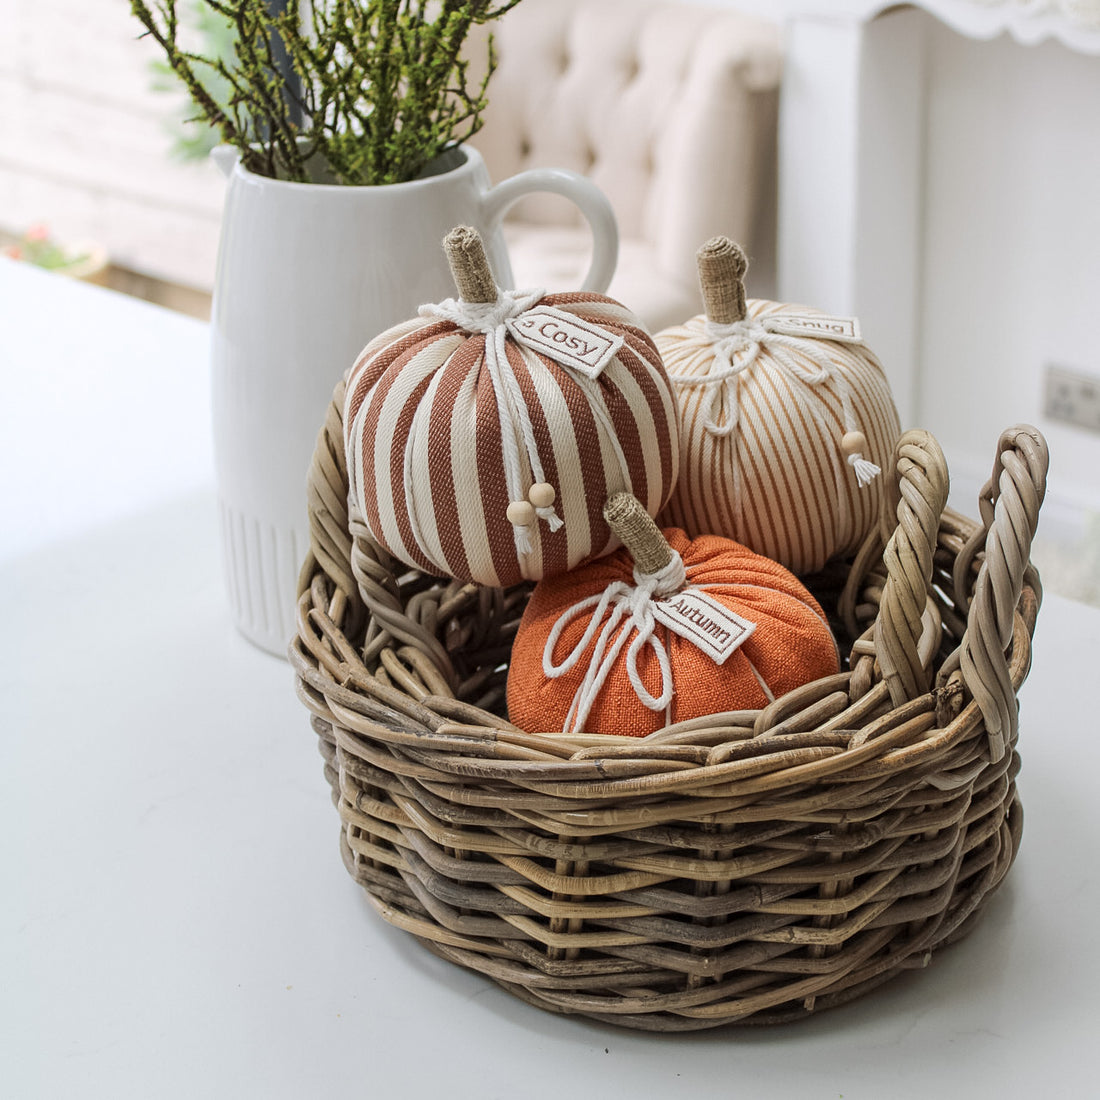 Pumpkin spice and all things nice - Introducing pumpkins to your home decor